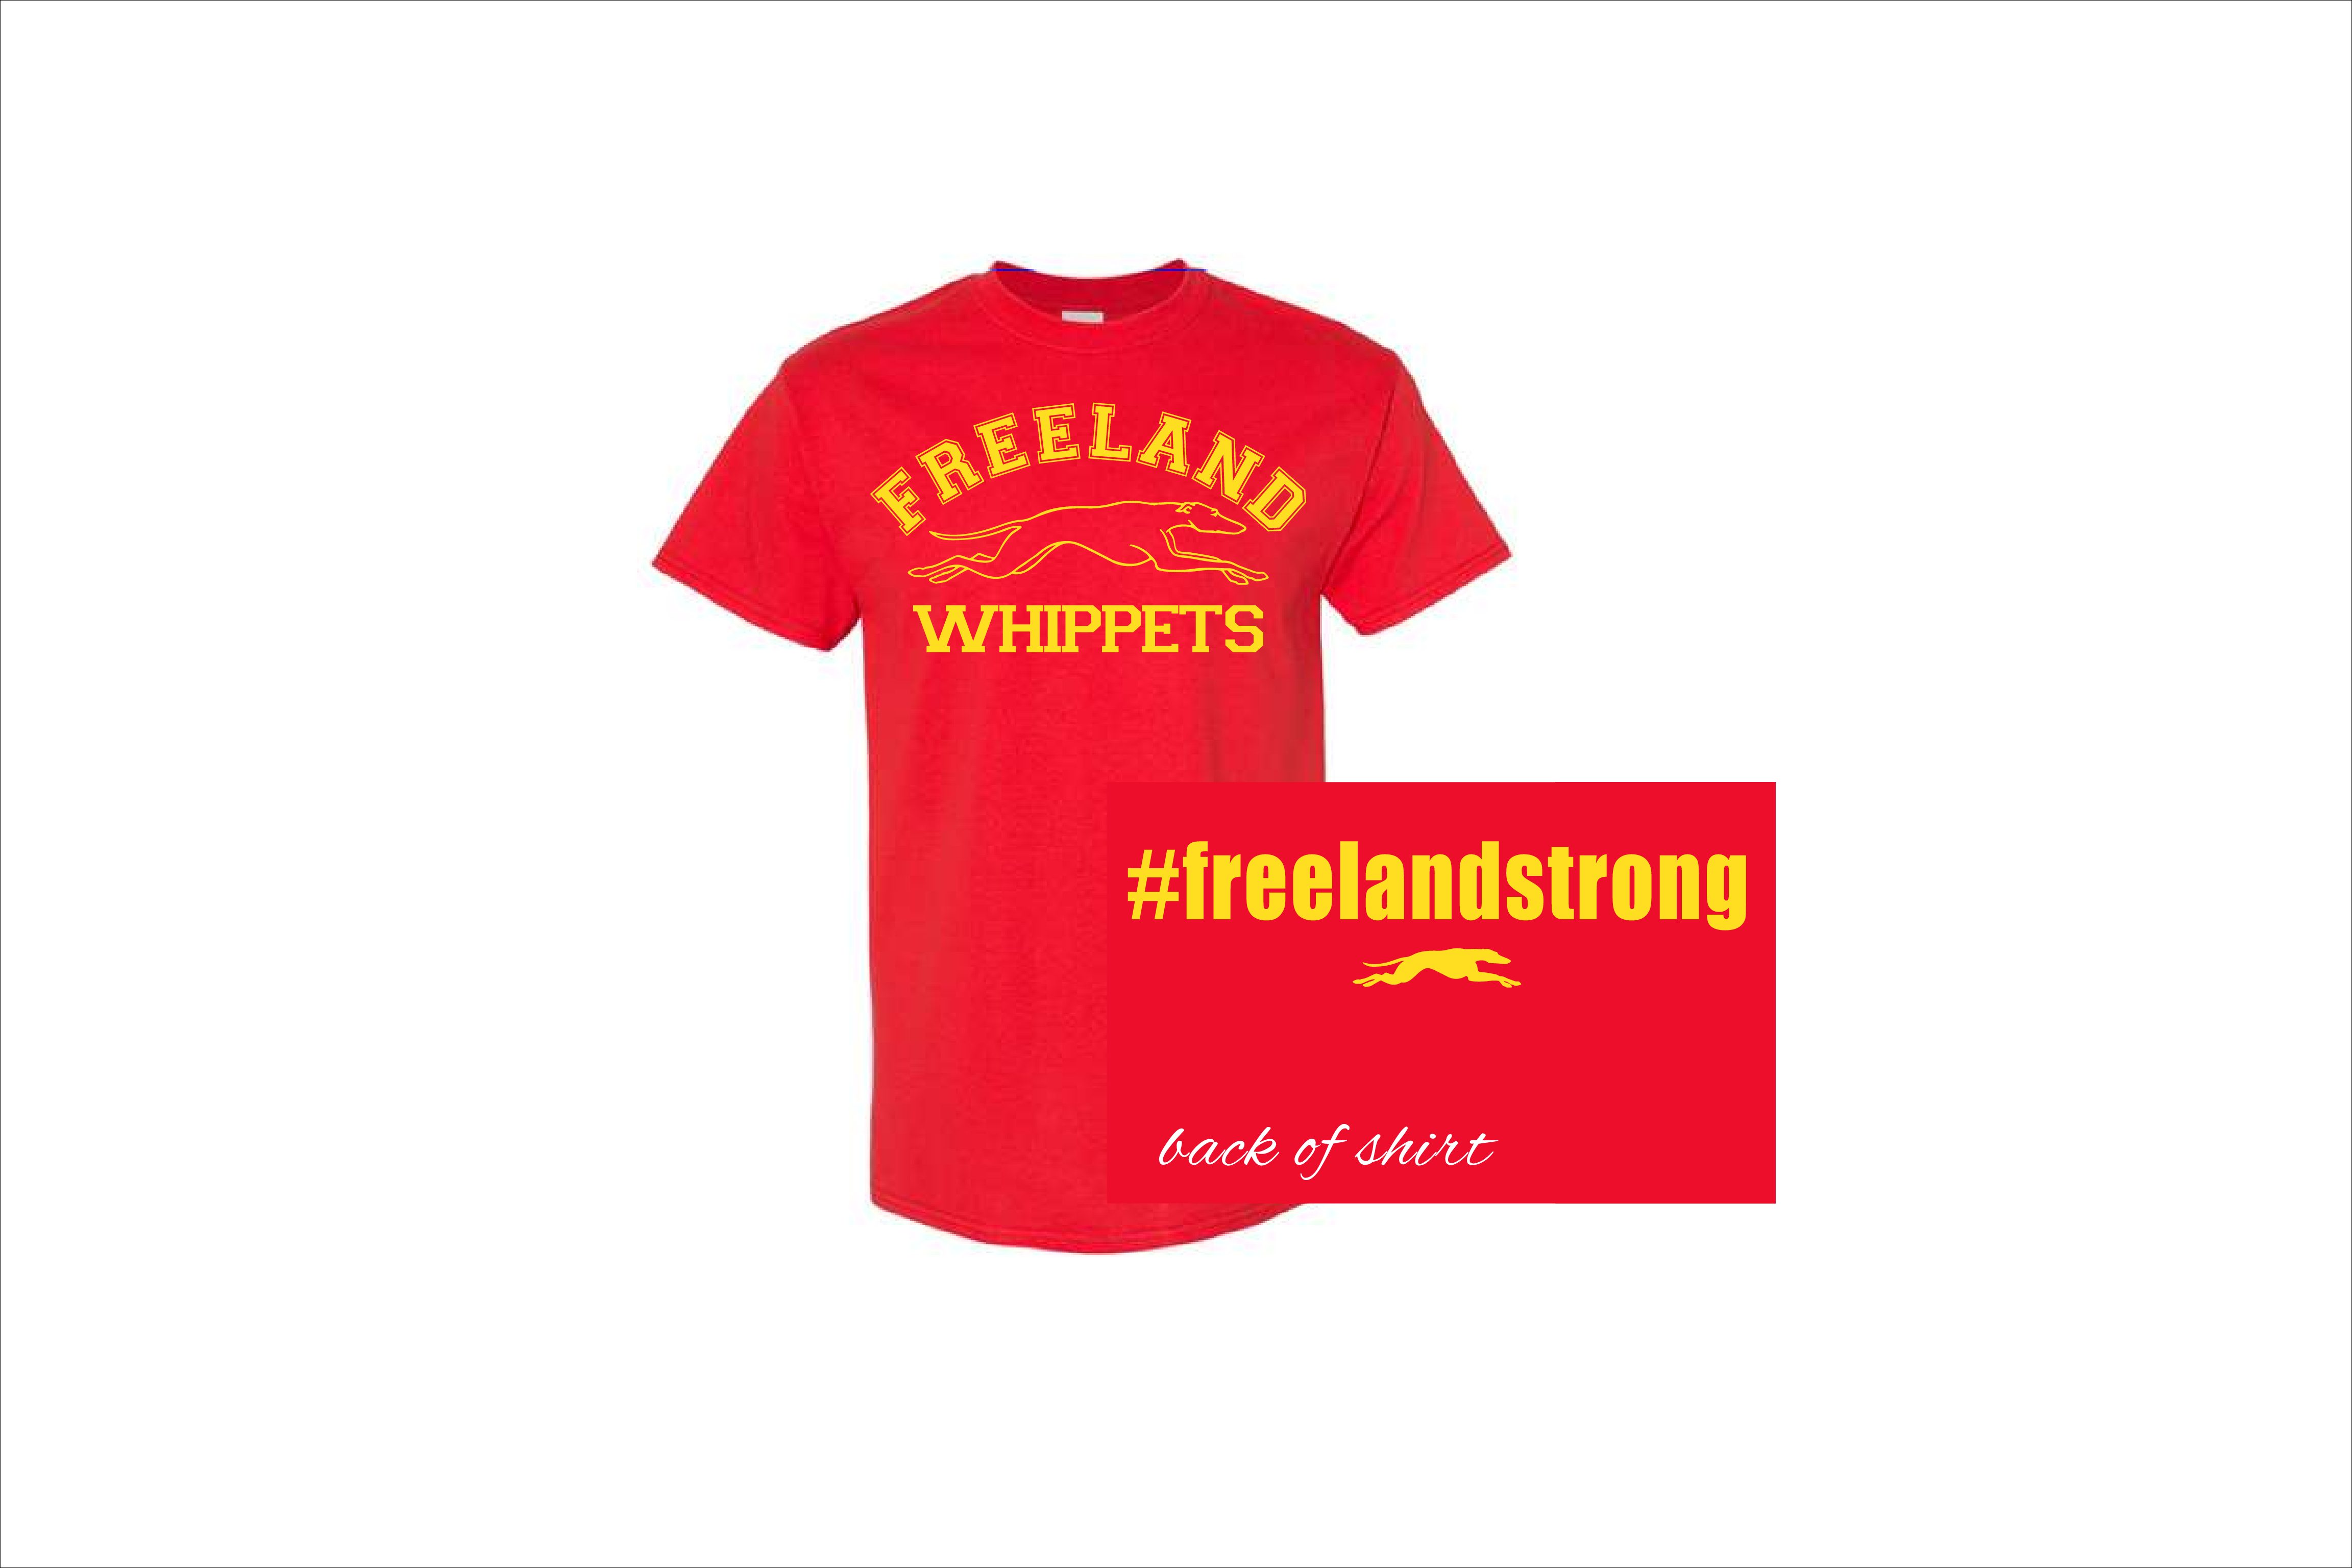 Gildan Freeland Strong T-Shirt (Youth and Adult Sizes)